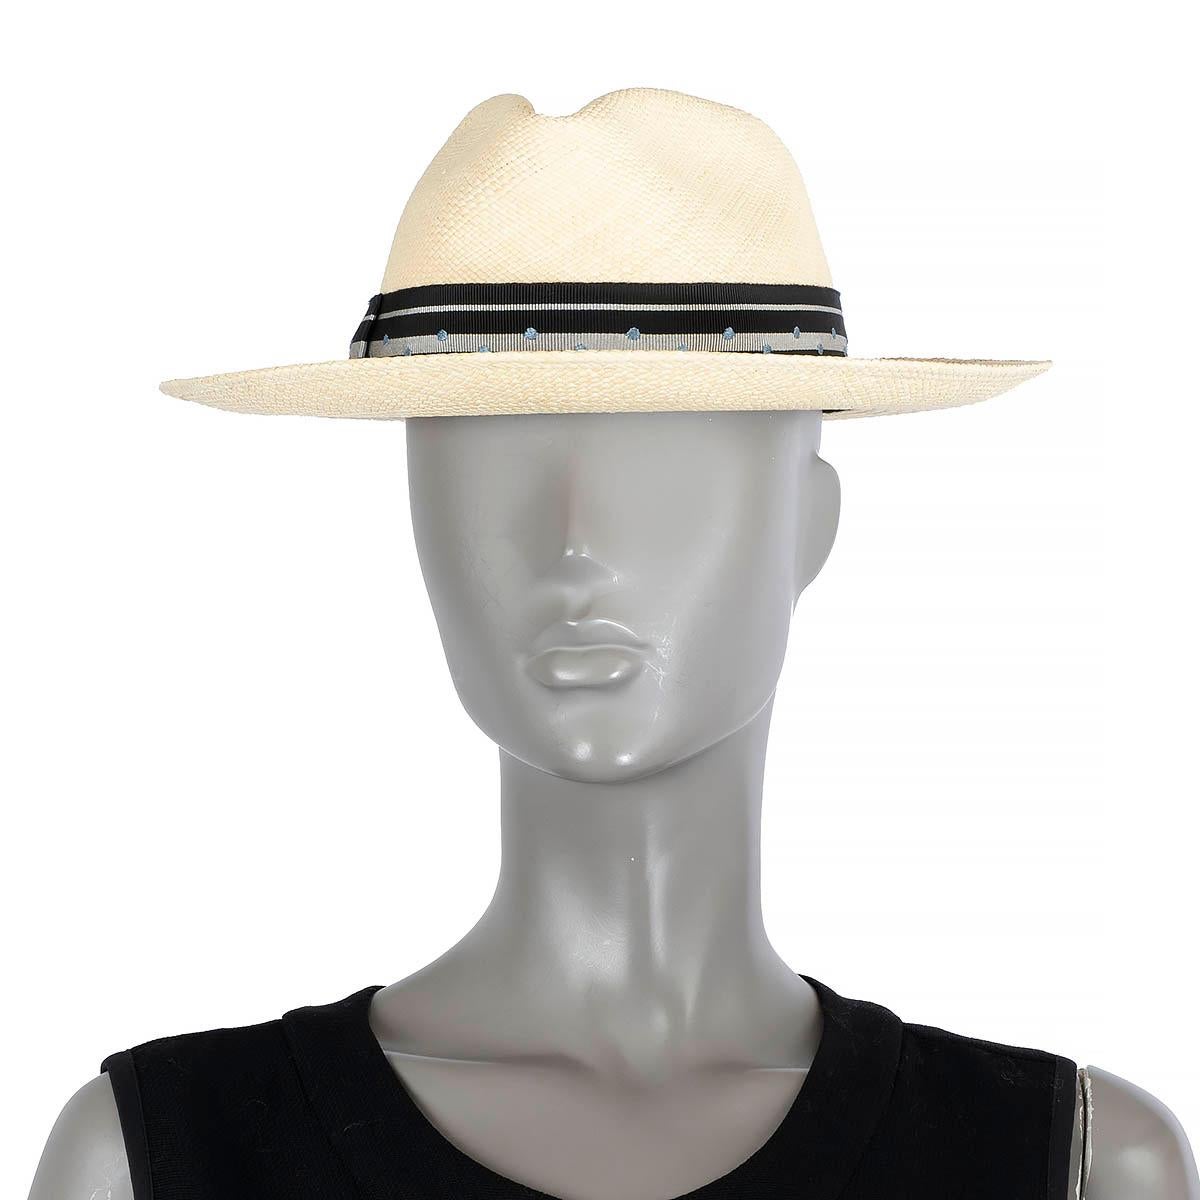 100% authentic Hermès Fedora hat in beige straw embellished with a black & silver striped grosgrain band with light blue polka-dots. Hermès Fedora hat in beige straw embellished with a black & silver striped grosgrain band with light blue